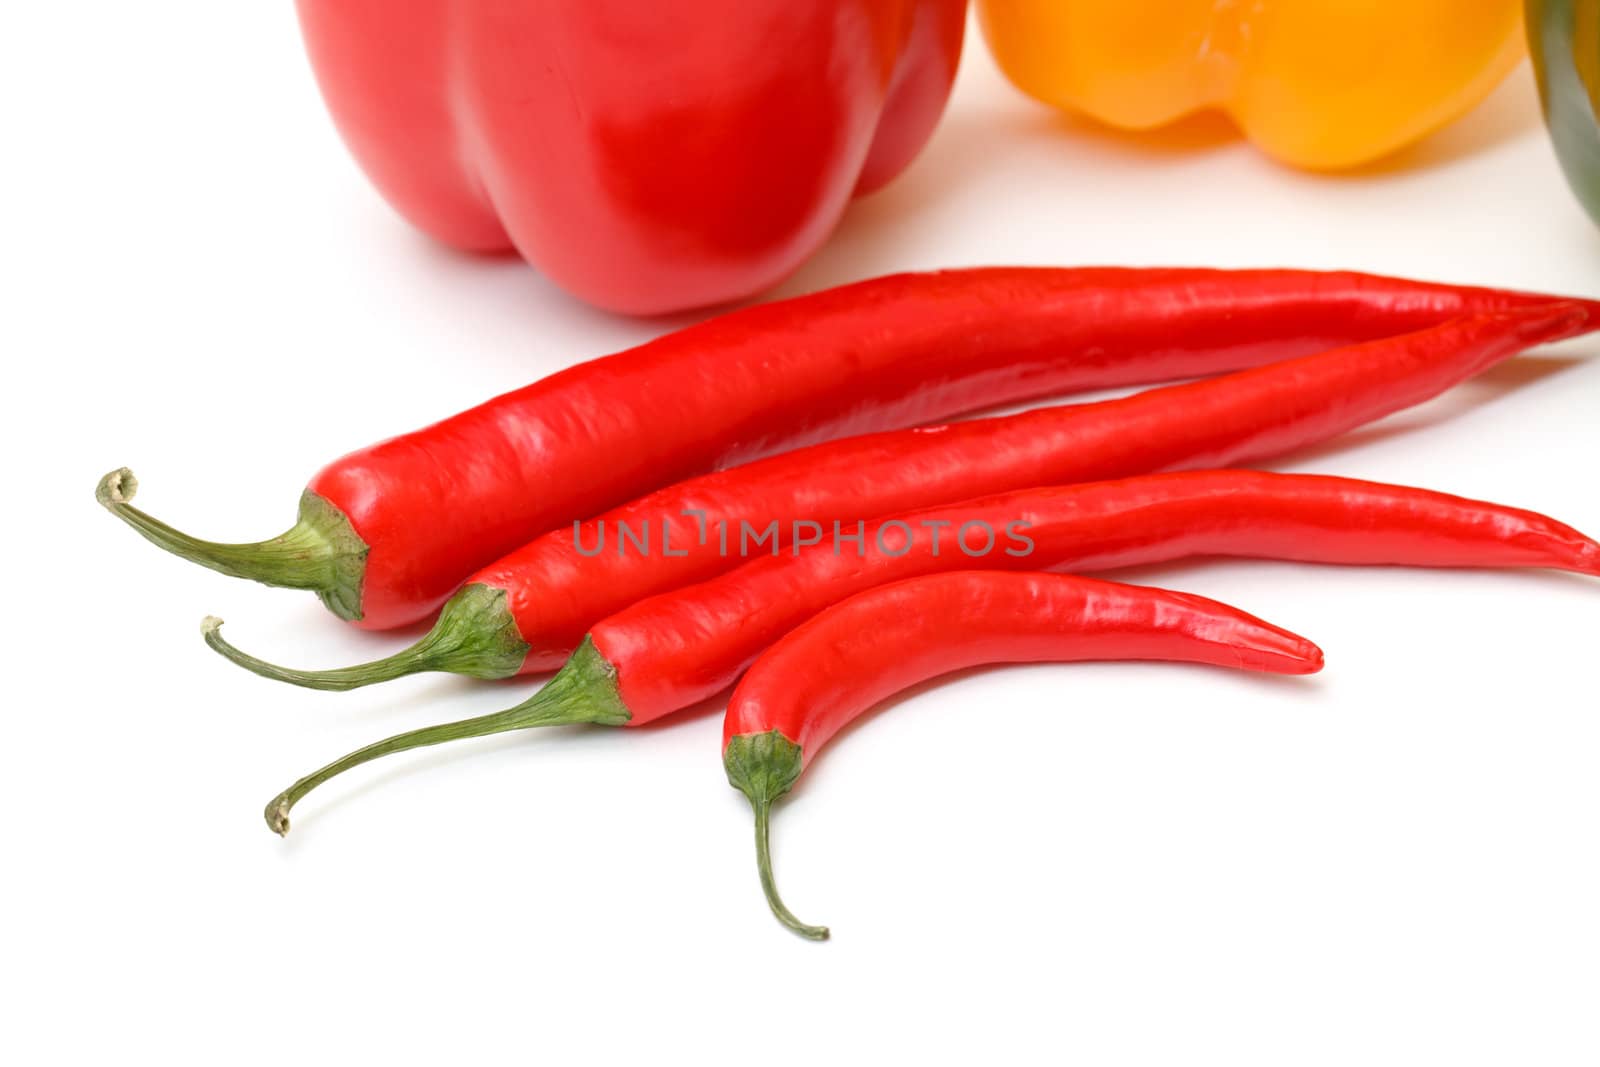 Chili pepper and paprika by Discovod